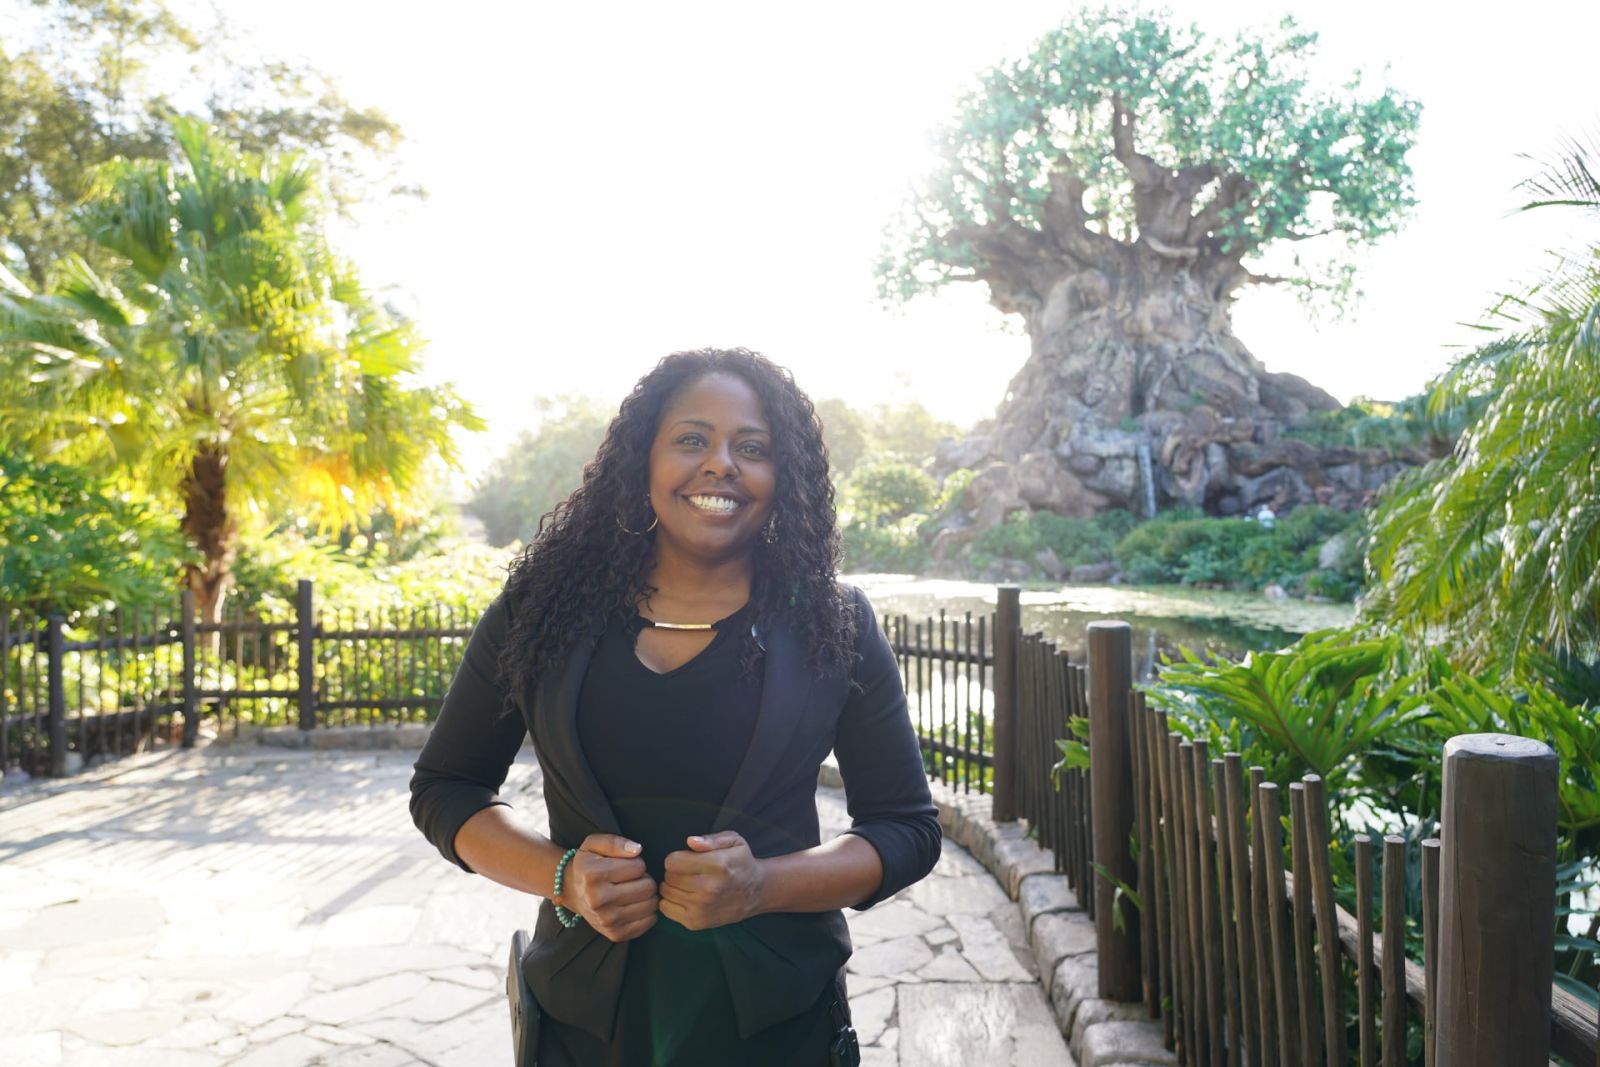 At Disney's Animal Kingdom, Angel Price is responsible for keeping the attractions running smoothly. (Purdue University photo/Jared Pike) (To download, see Media Kit Resources below.)